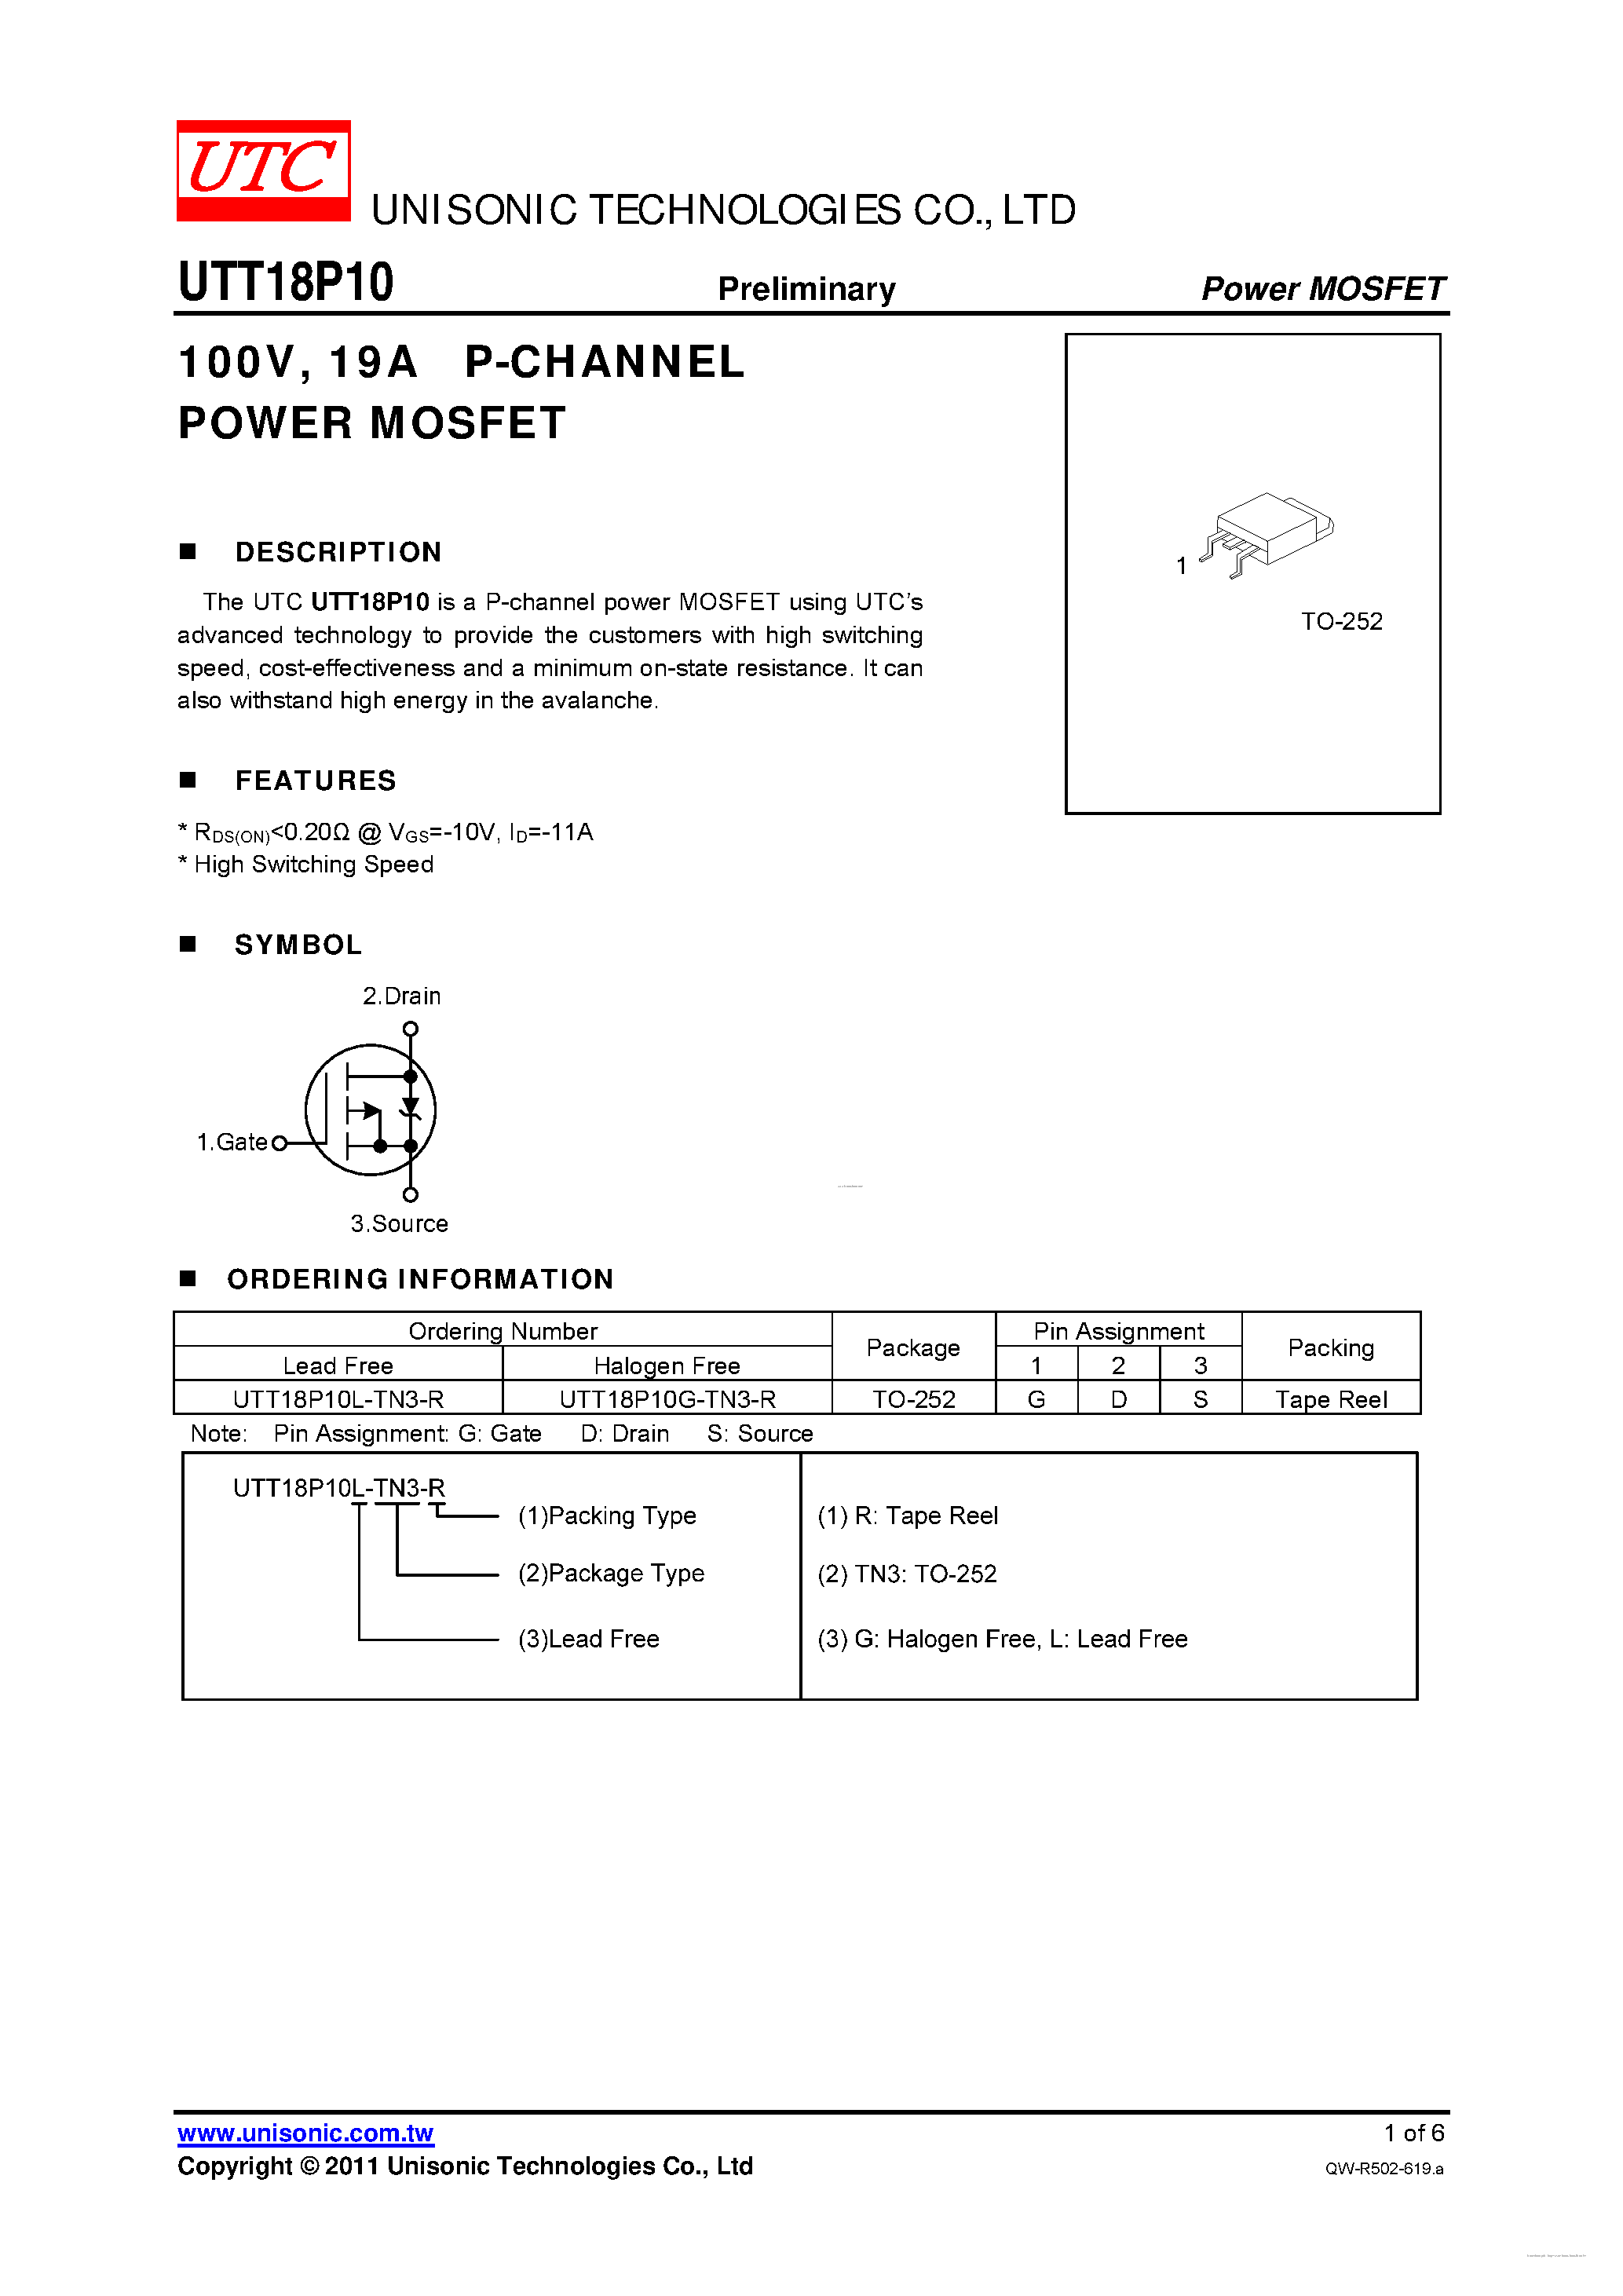 Даташит UTT18P10 - P-CHANNEL POWER MOSFET страница 1